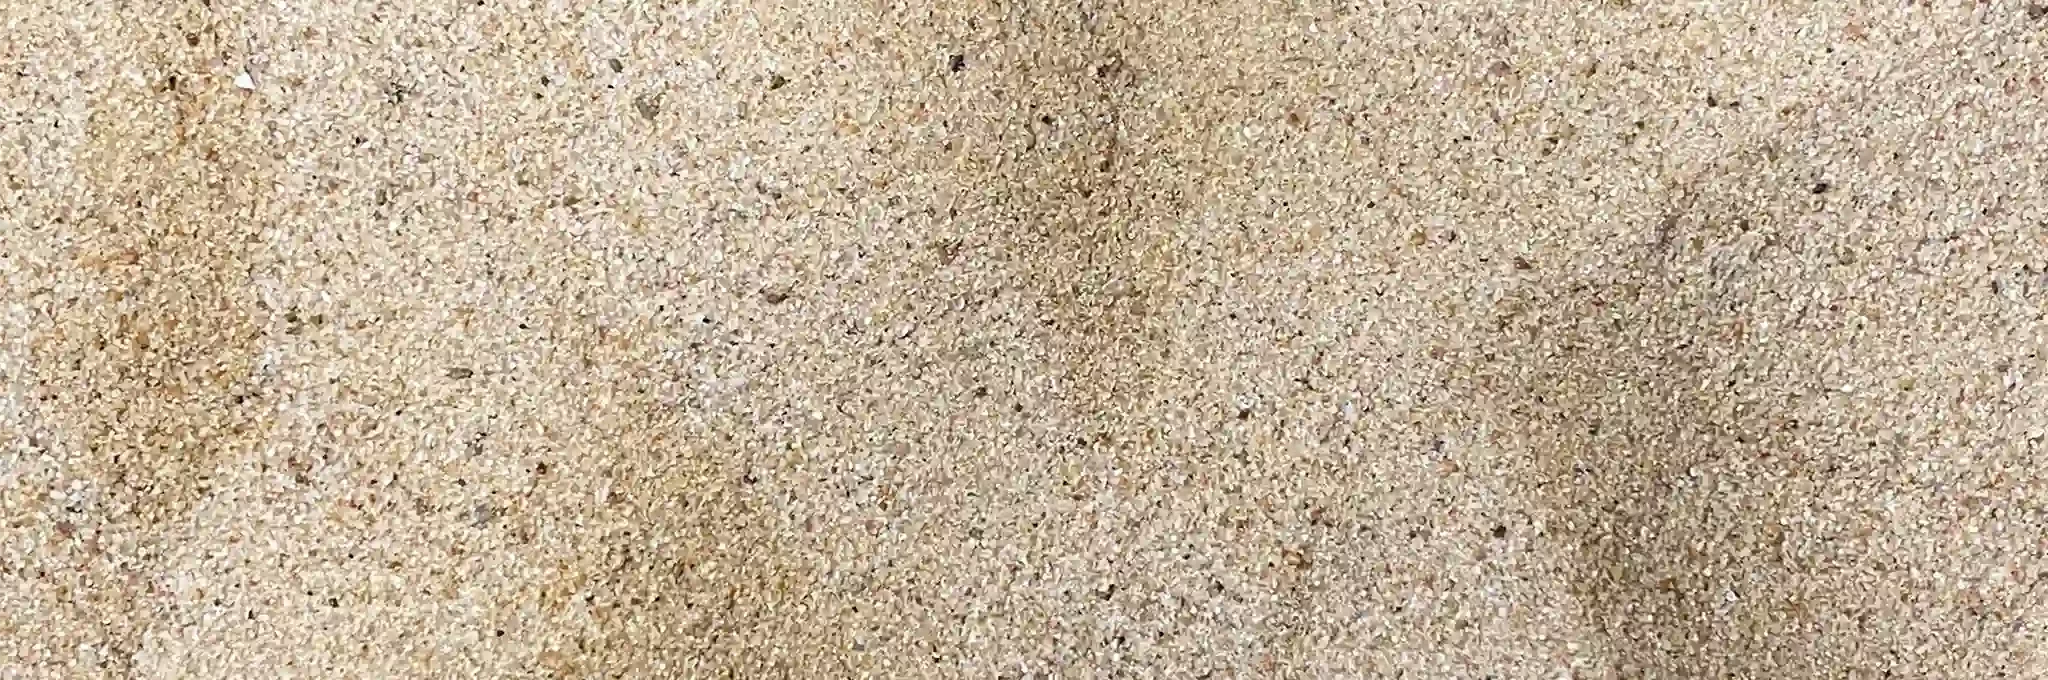 A close-up view of Fairway Sand, Capping Sand, and Golf Sand.